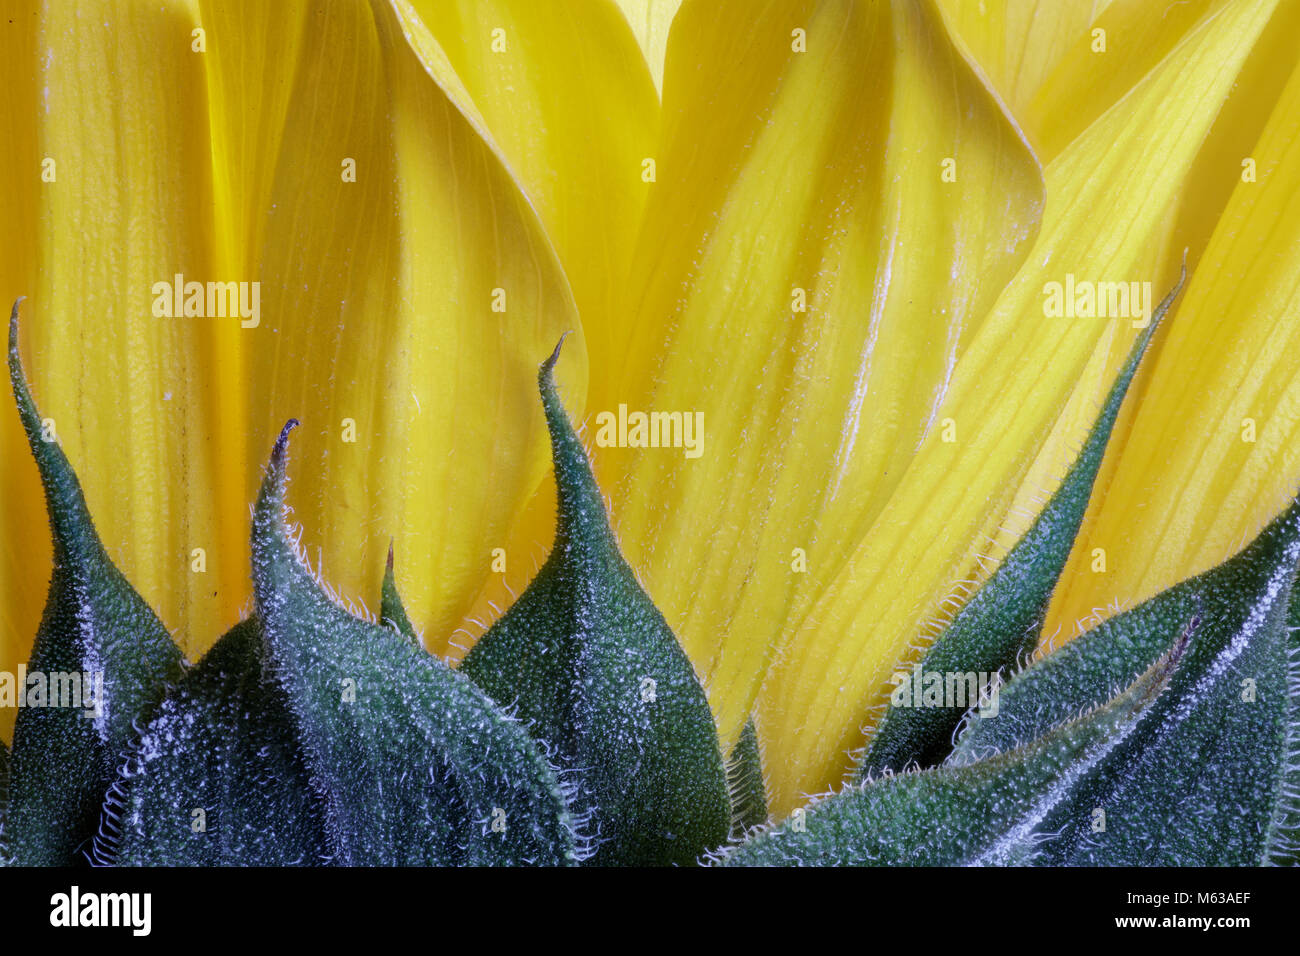 Extreme close up of part of a sunflower with soft yellow petals contrasting against sharp green leaves. Stock Photo